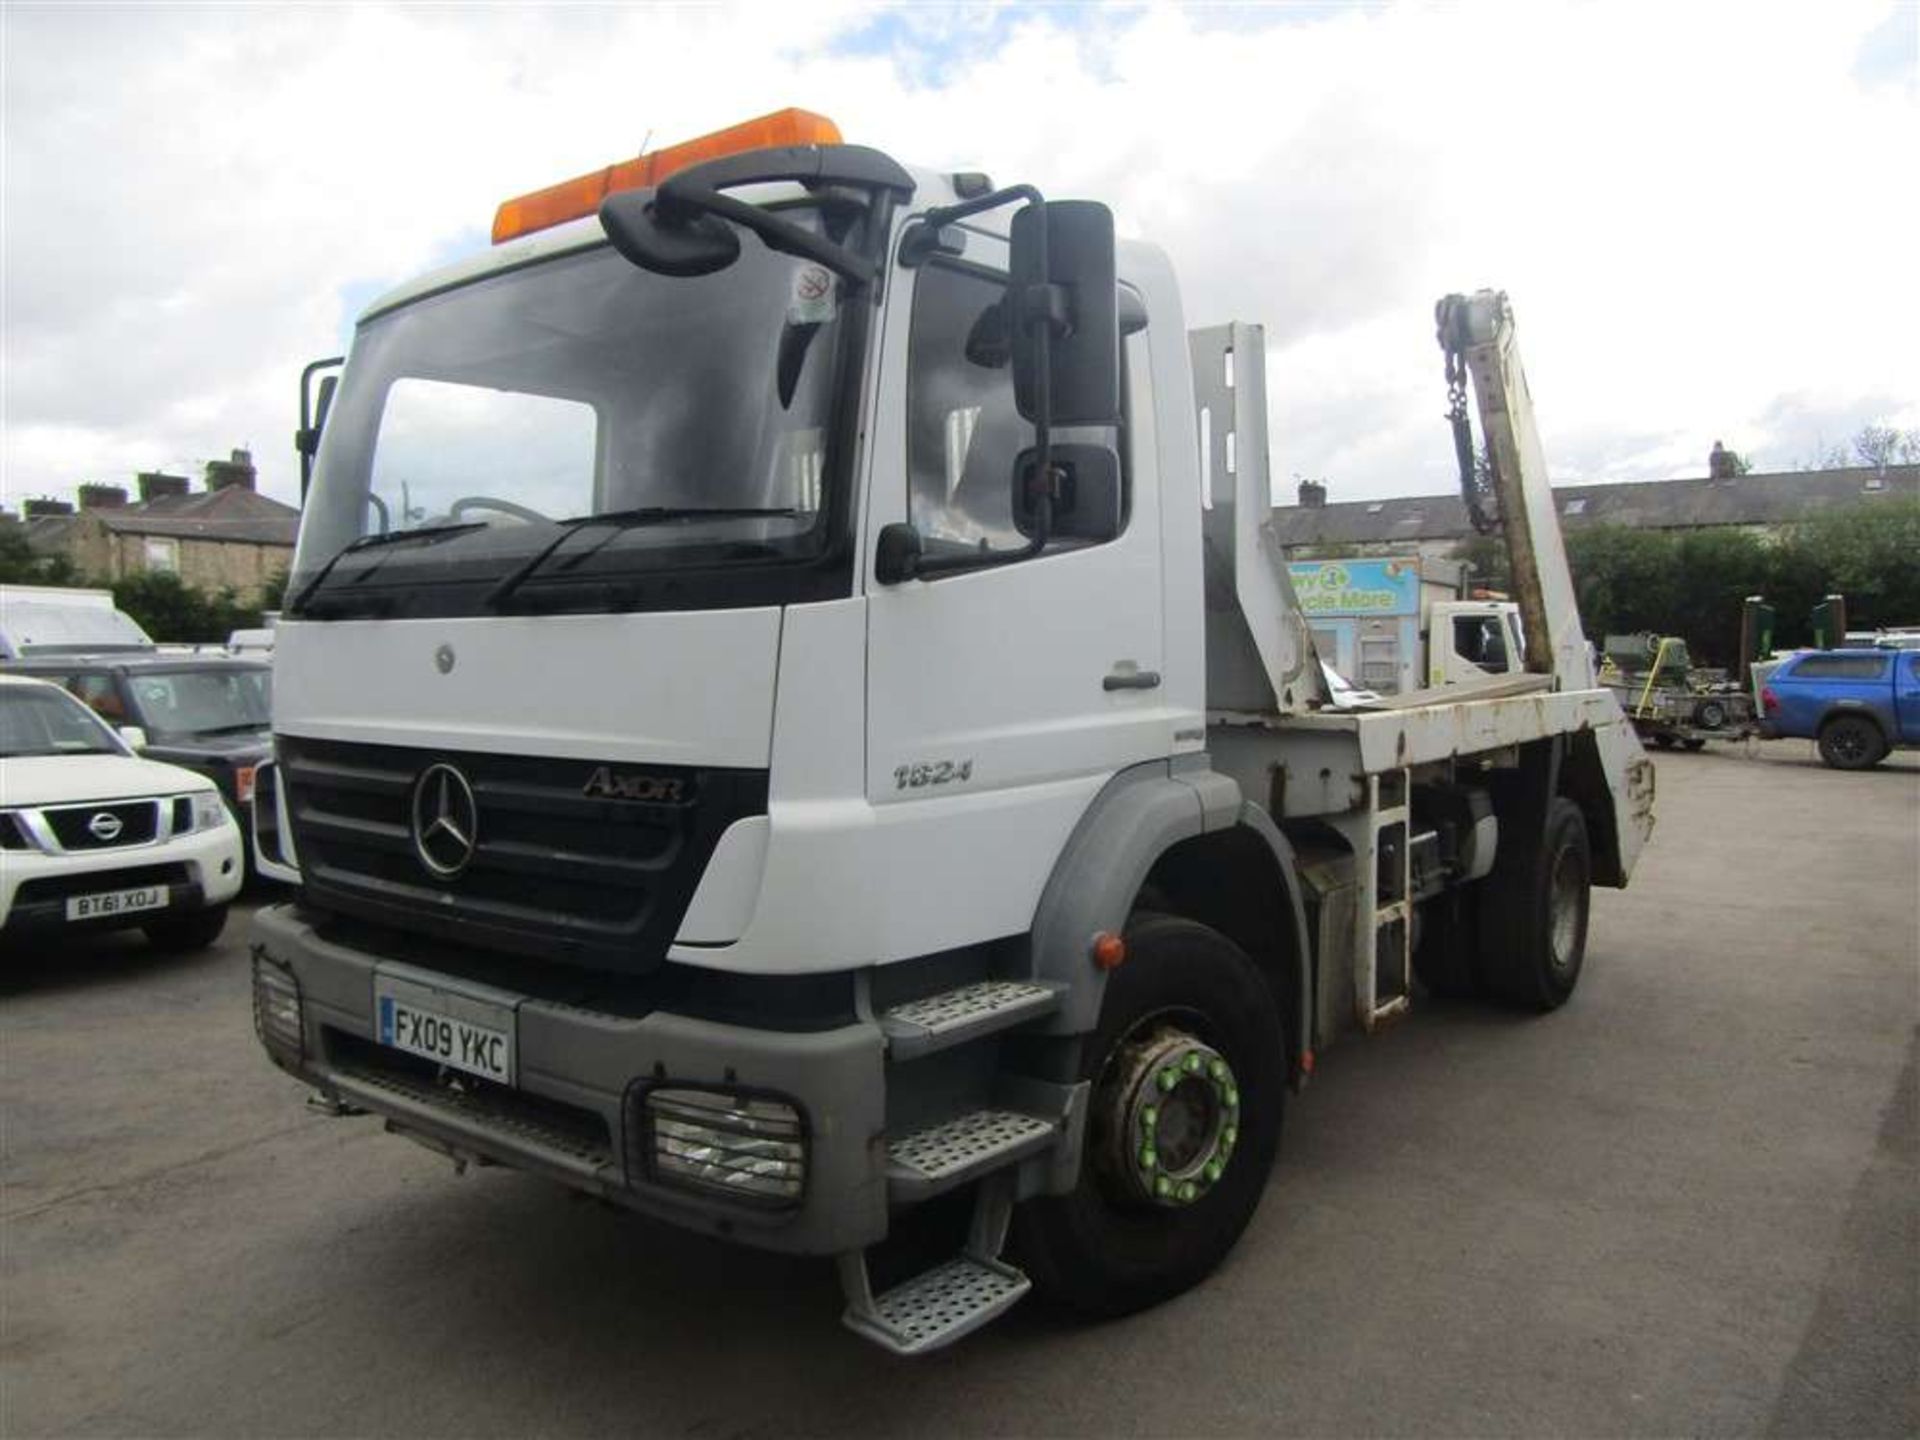 2009 09 reg Mercedes 1824K Axor Skip Wagon (Runs for Loading Only) (Direct United Utilities Water) - Image 2 of 6